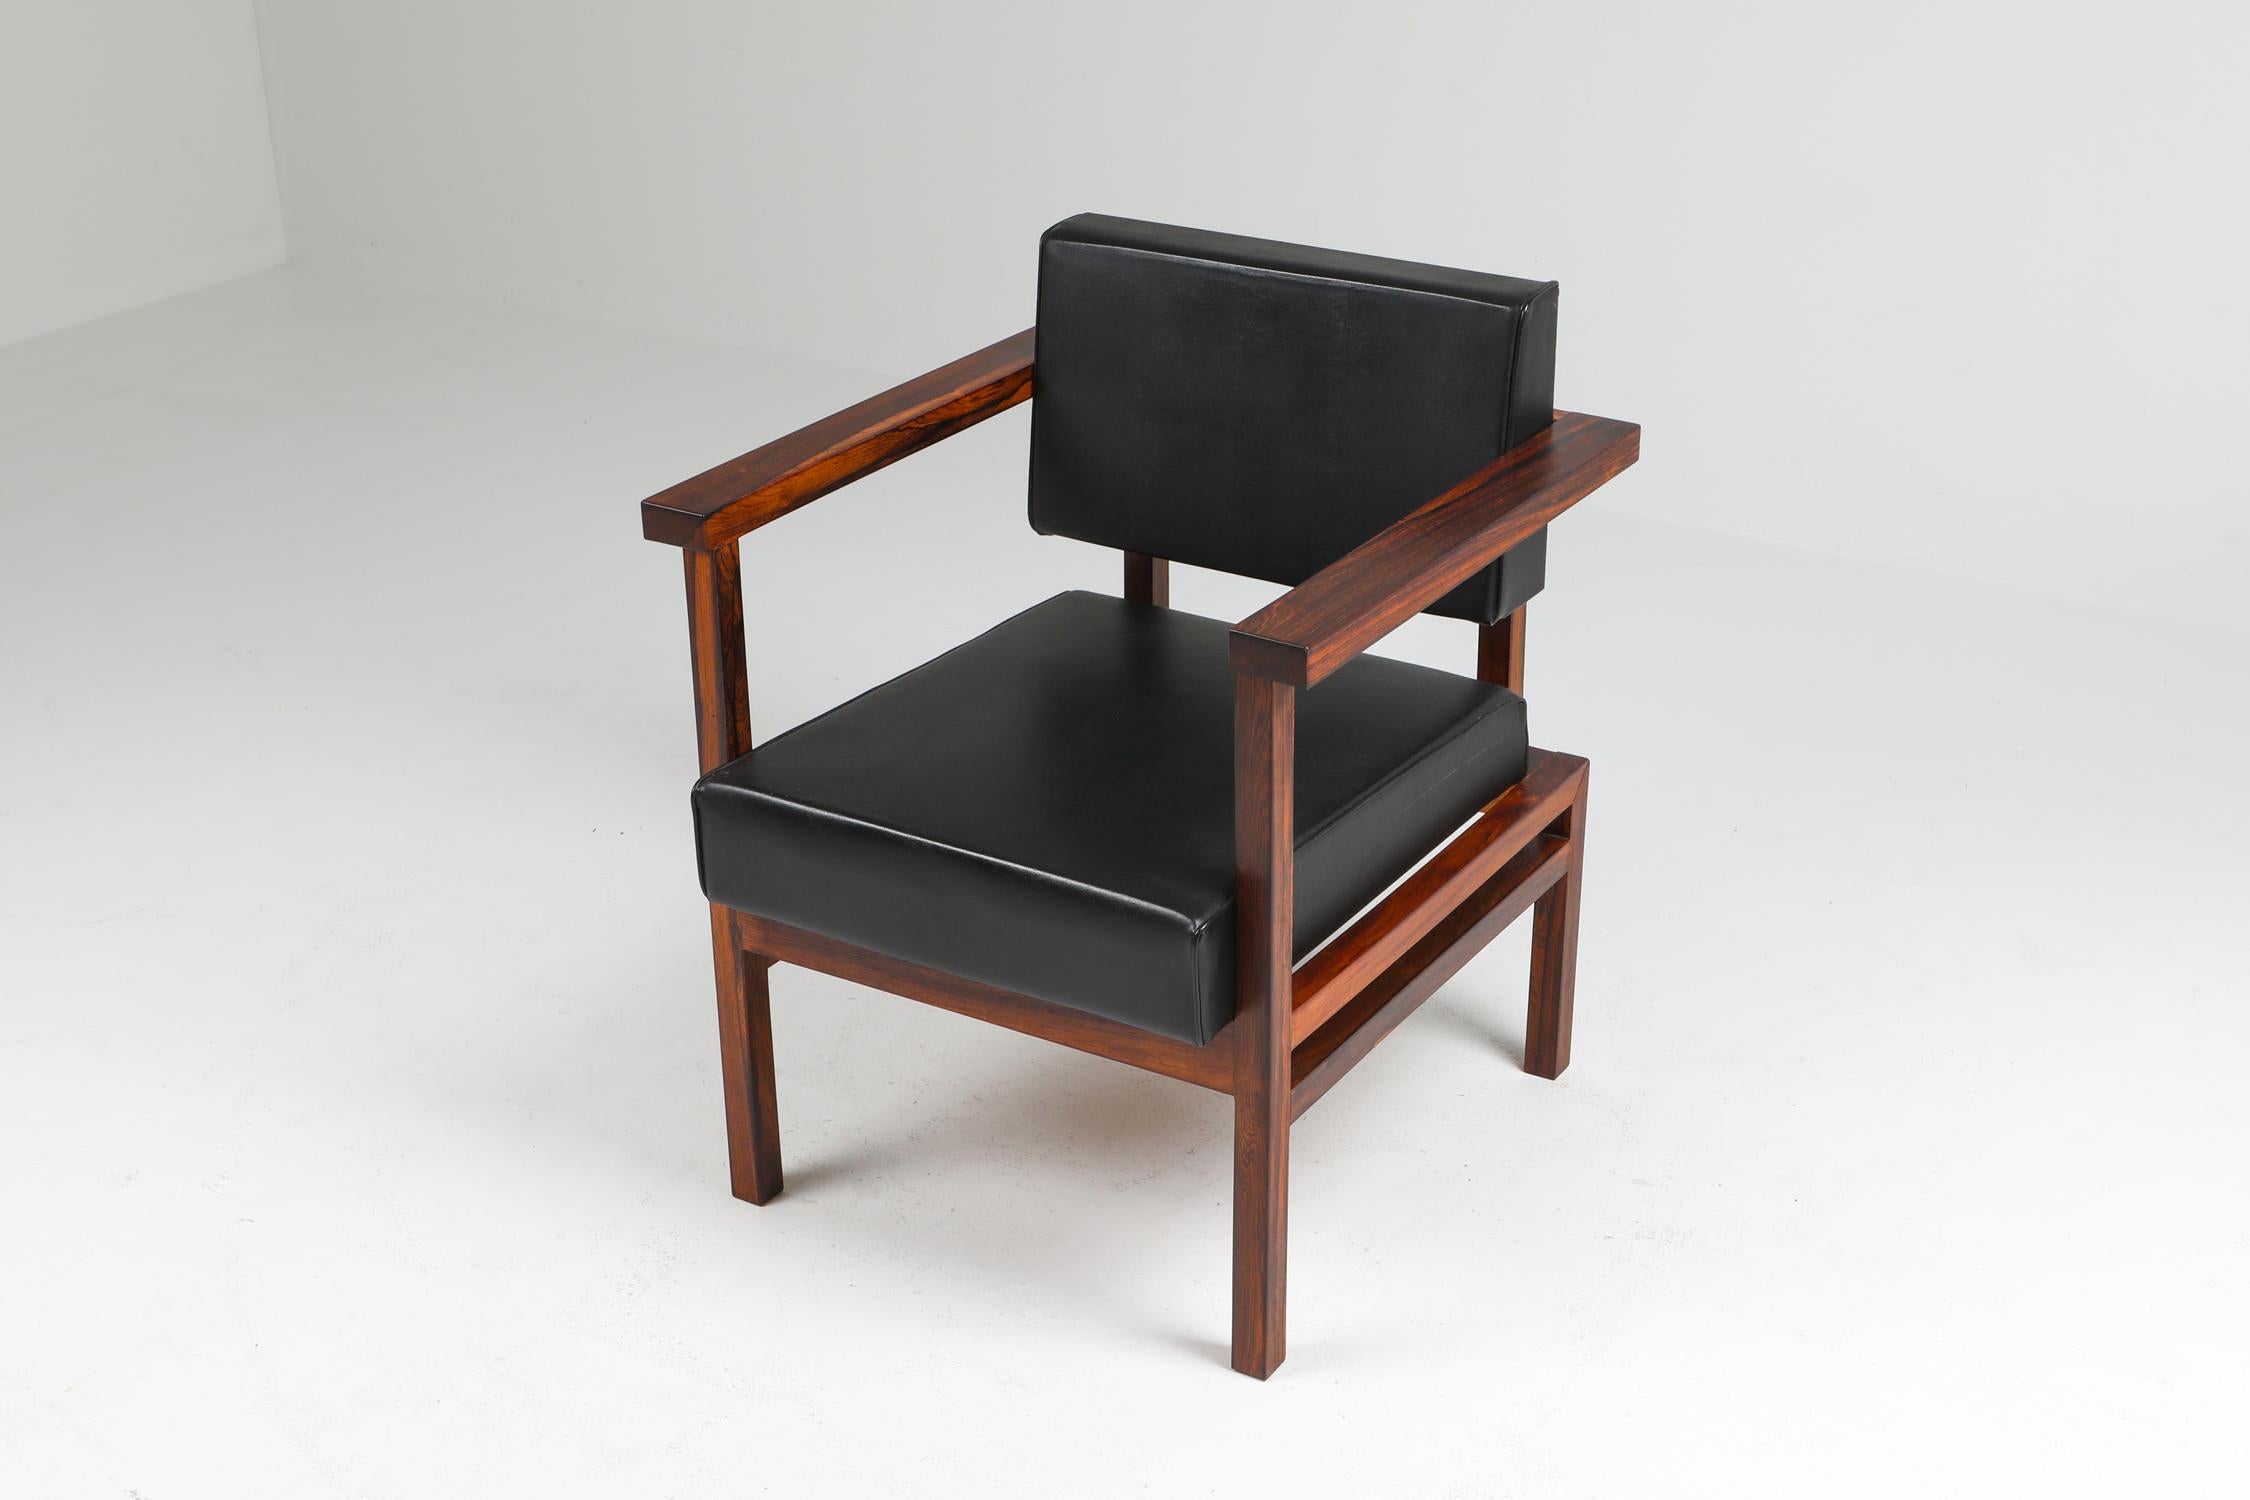 Wim Den Boon Executive Chairs in Black Leather, 1950s In Excellent Condition For Sale In Antwerp, BE